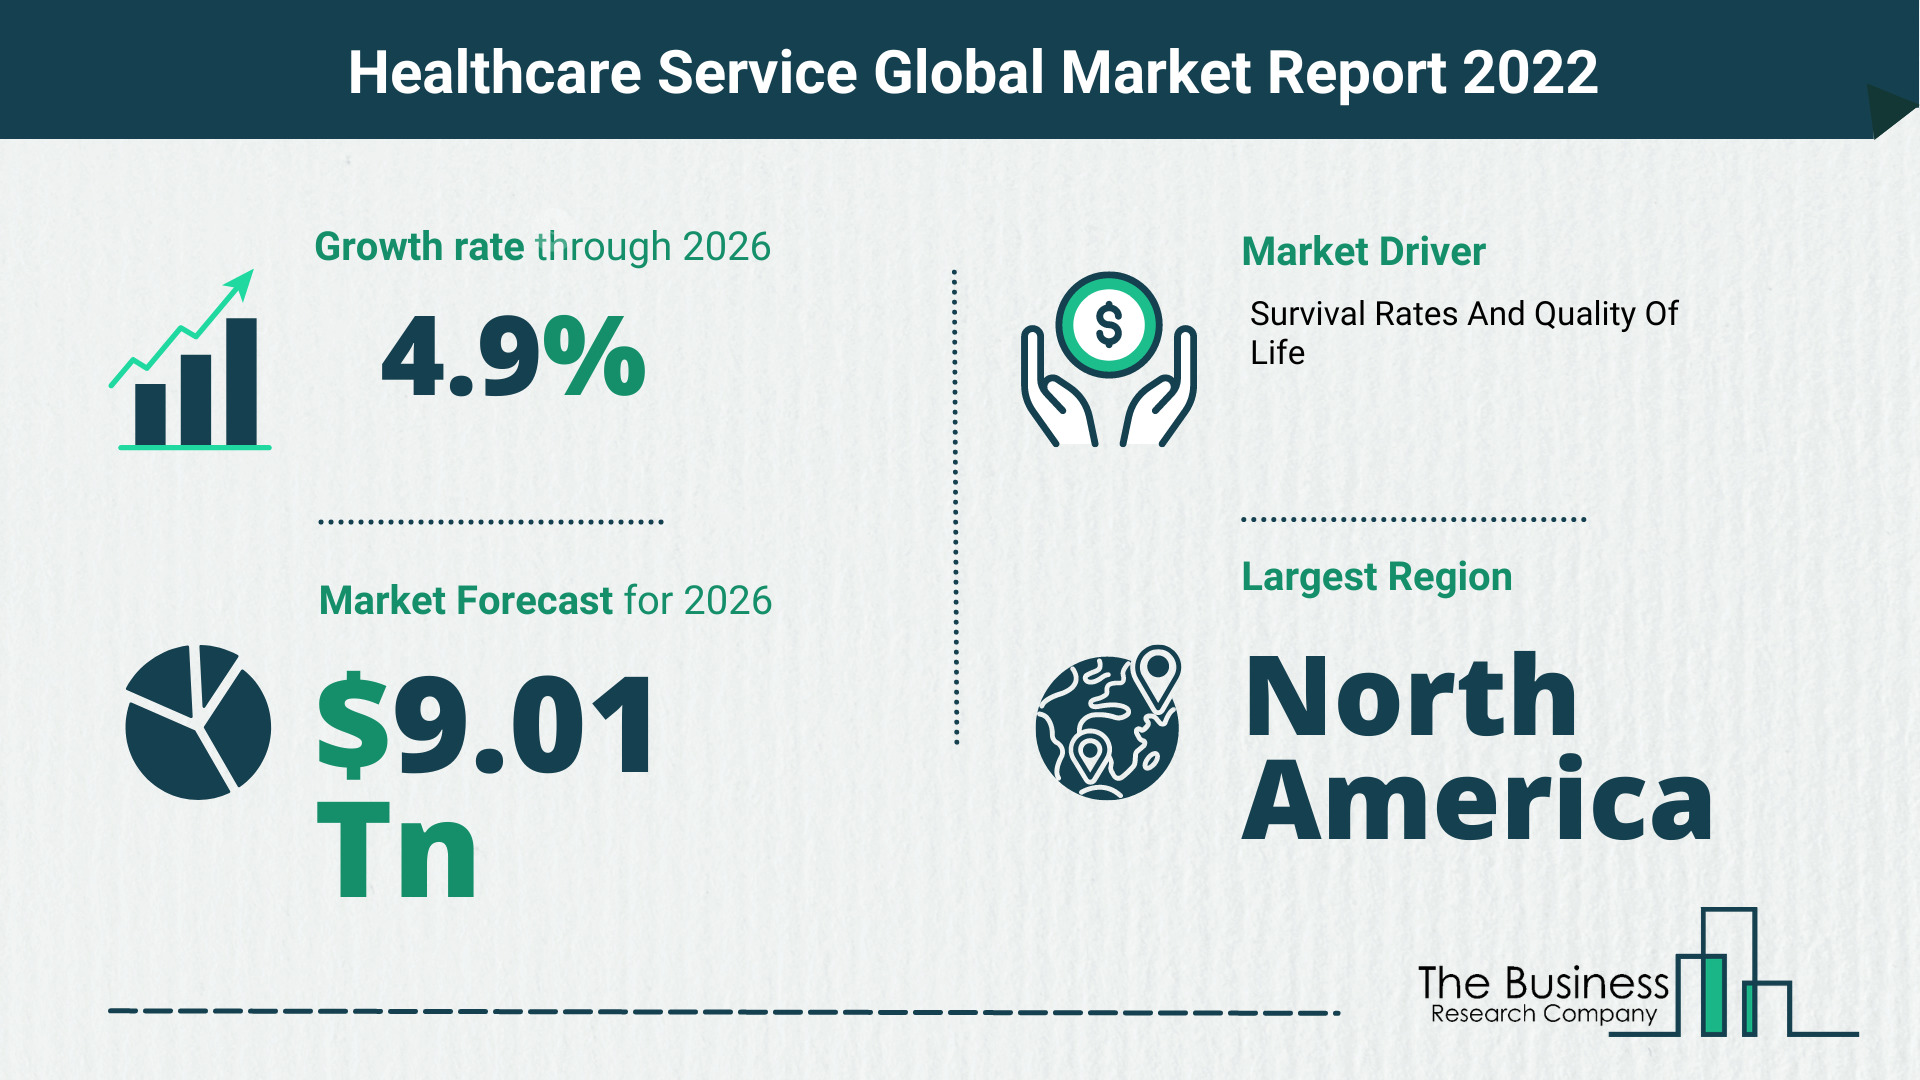 The Healthcare Services Market Share, Market Size, And Growth Rate 2022